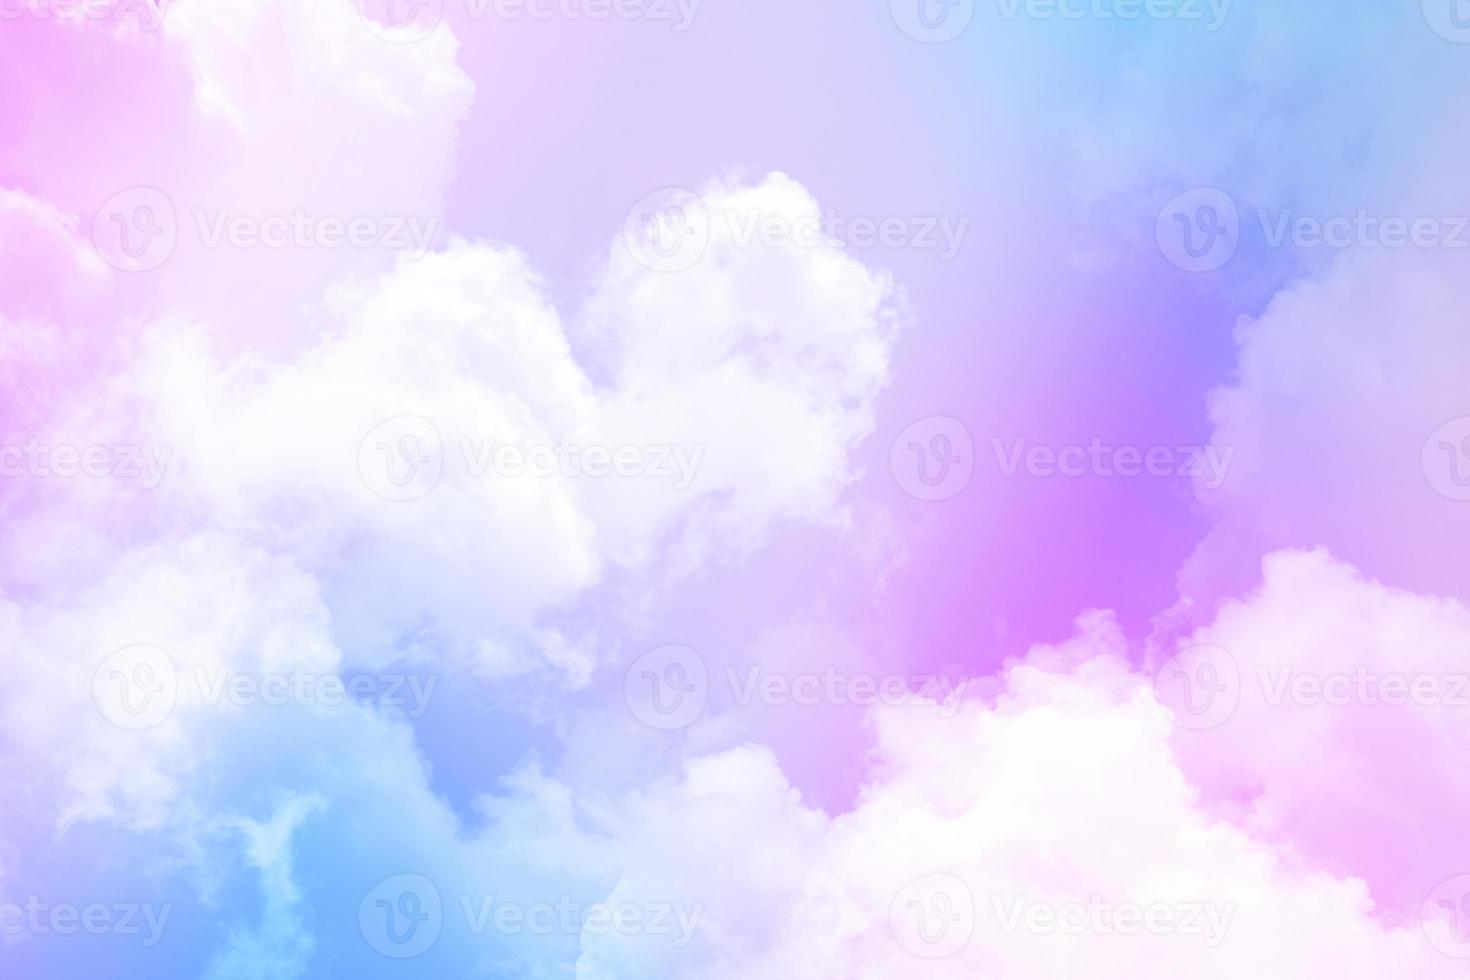 beauty sweet pastel violet blue colorful with fluffy clouds on sky. multi color rainbow image. abstract fantasy growing light photo